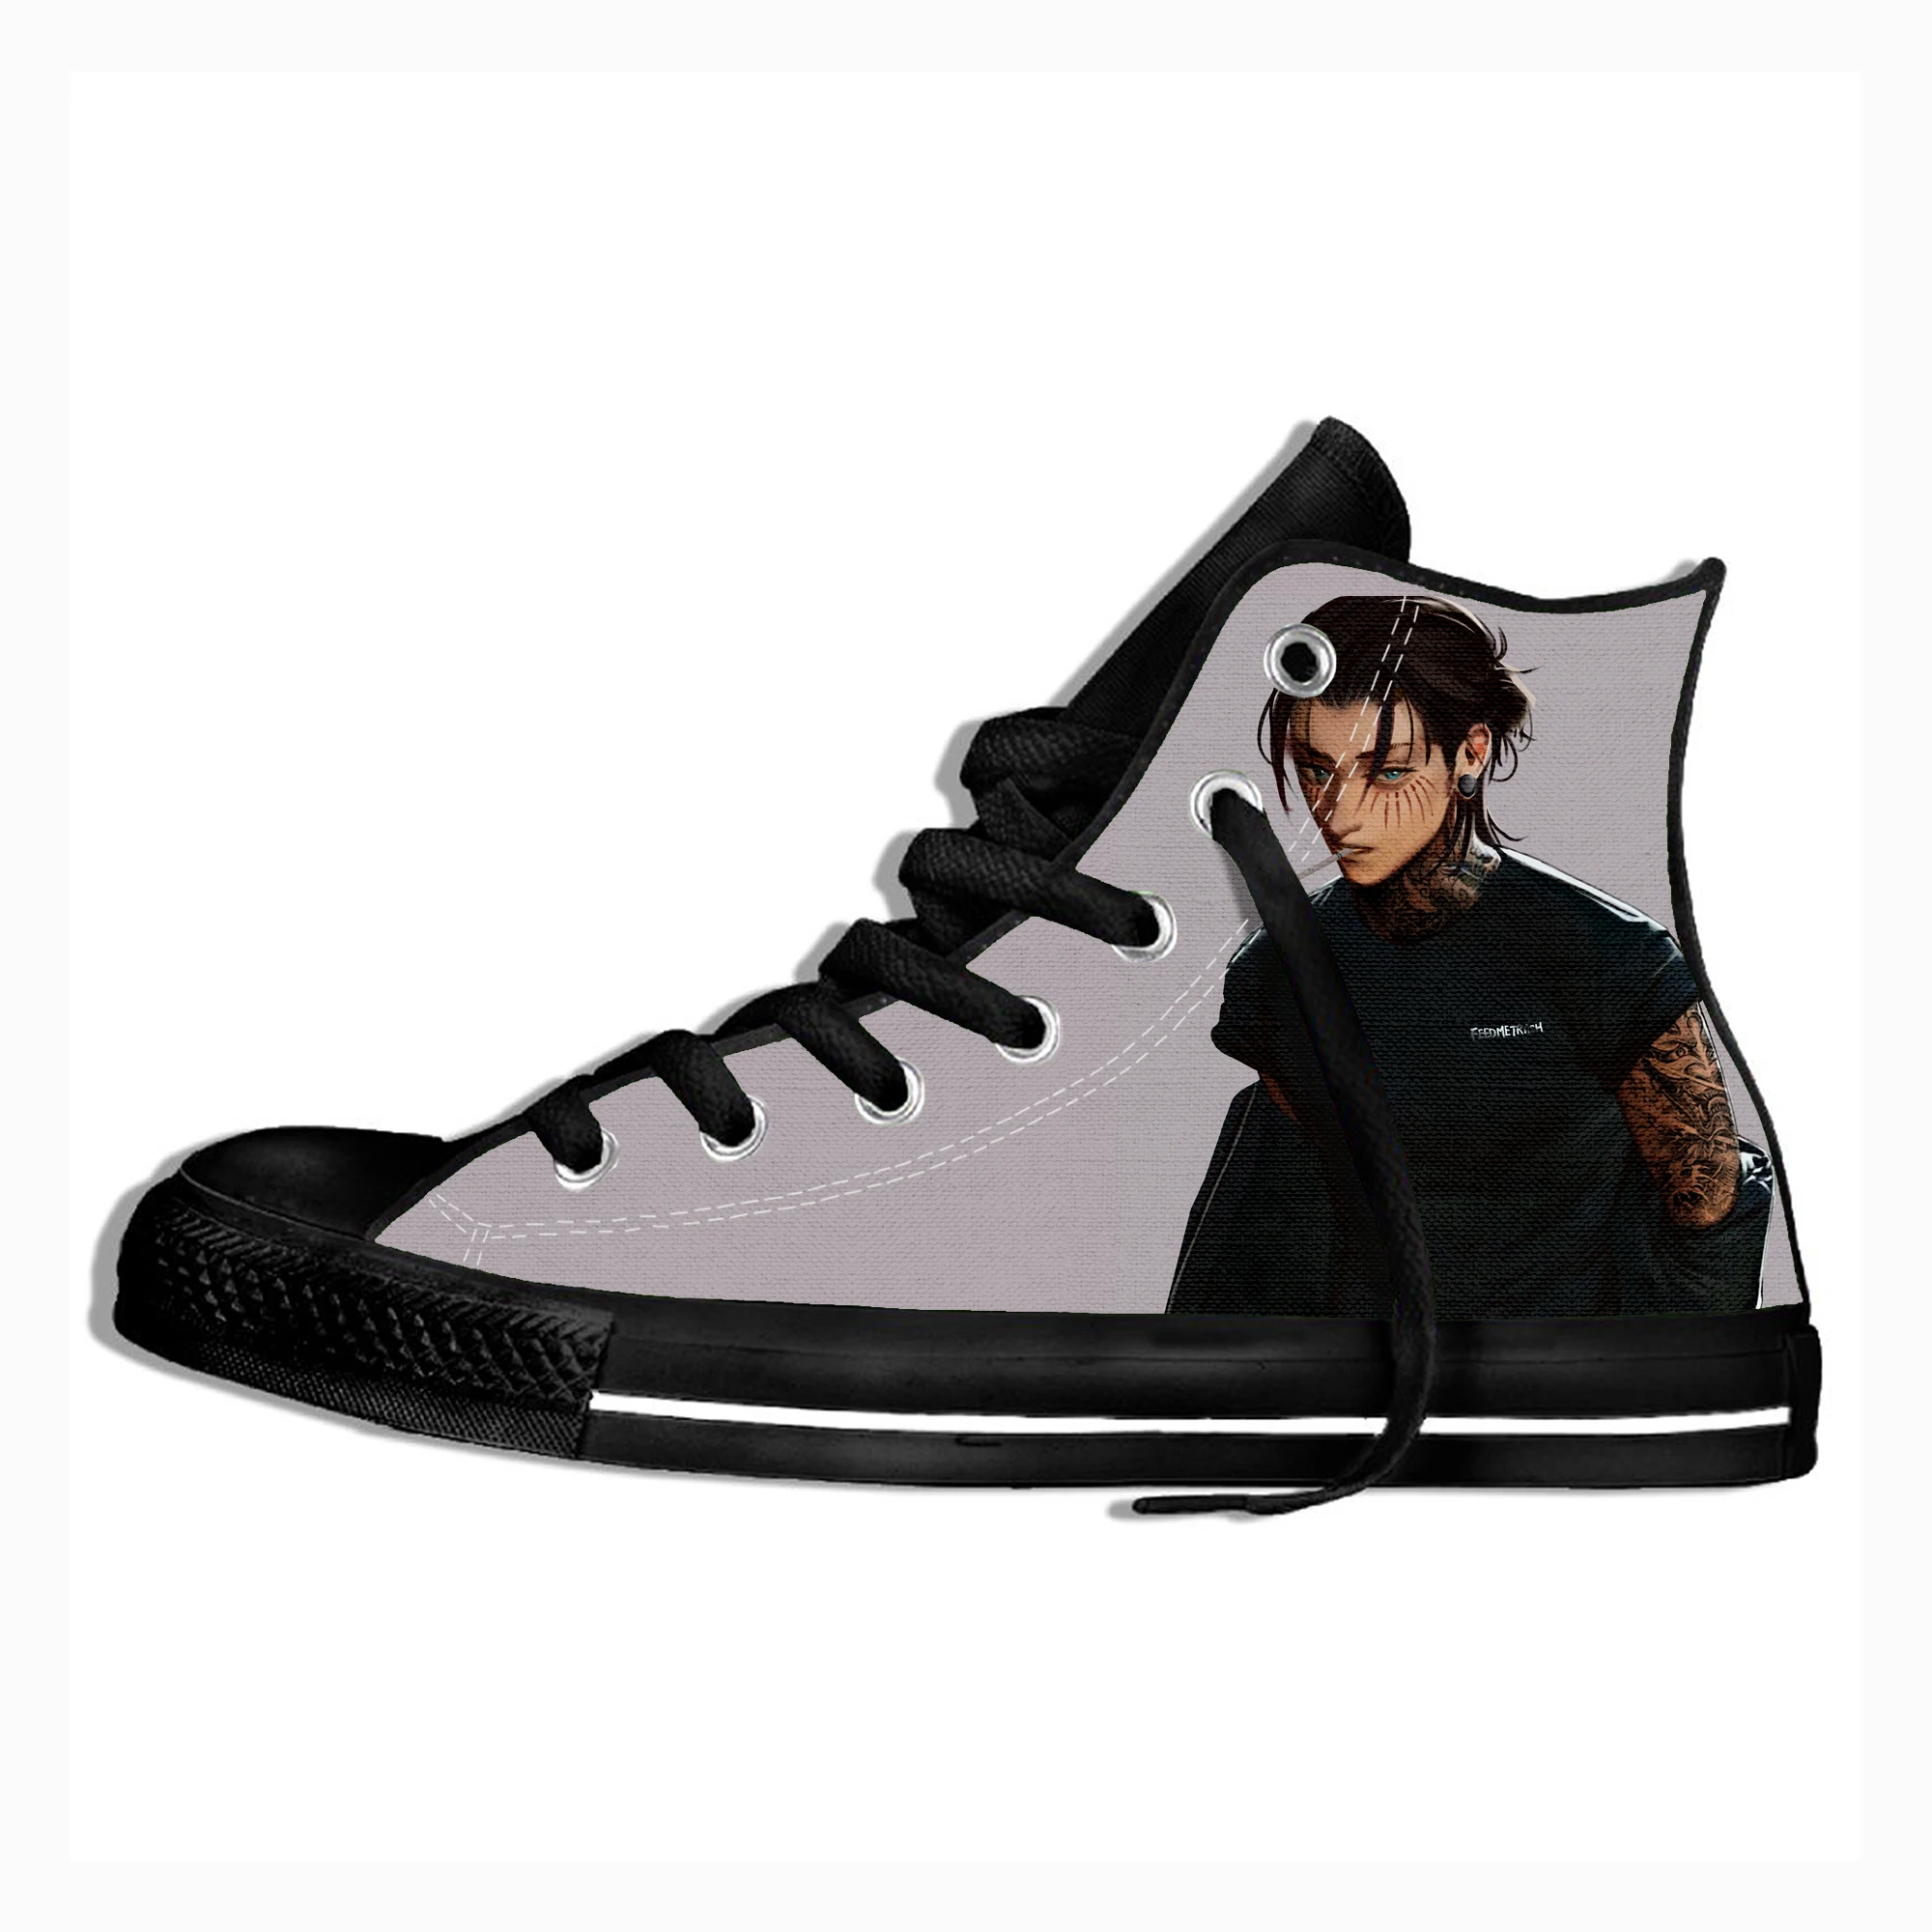 

Attack on Titan Fashion Vulcanized Shoes Men Women Sneakers New Retro Canvas Shoes Flat Fashion Comfort High Top Shoes